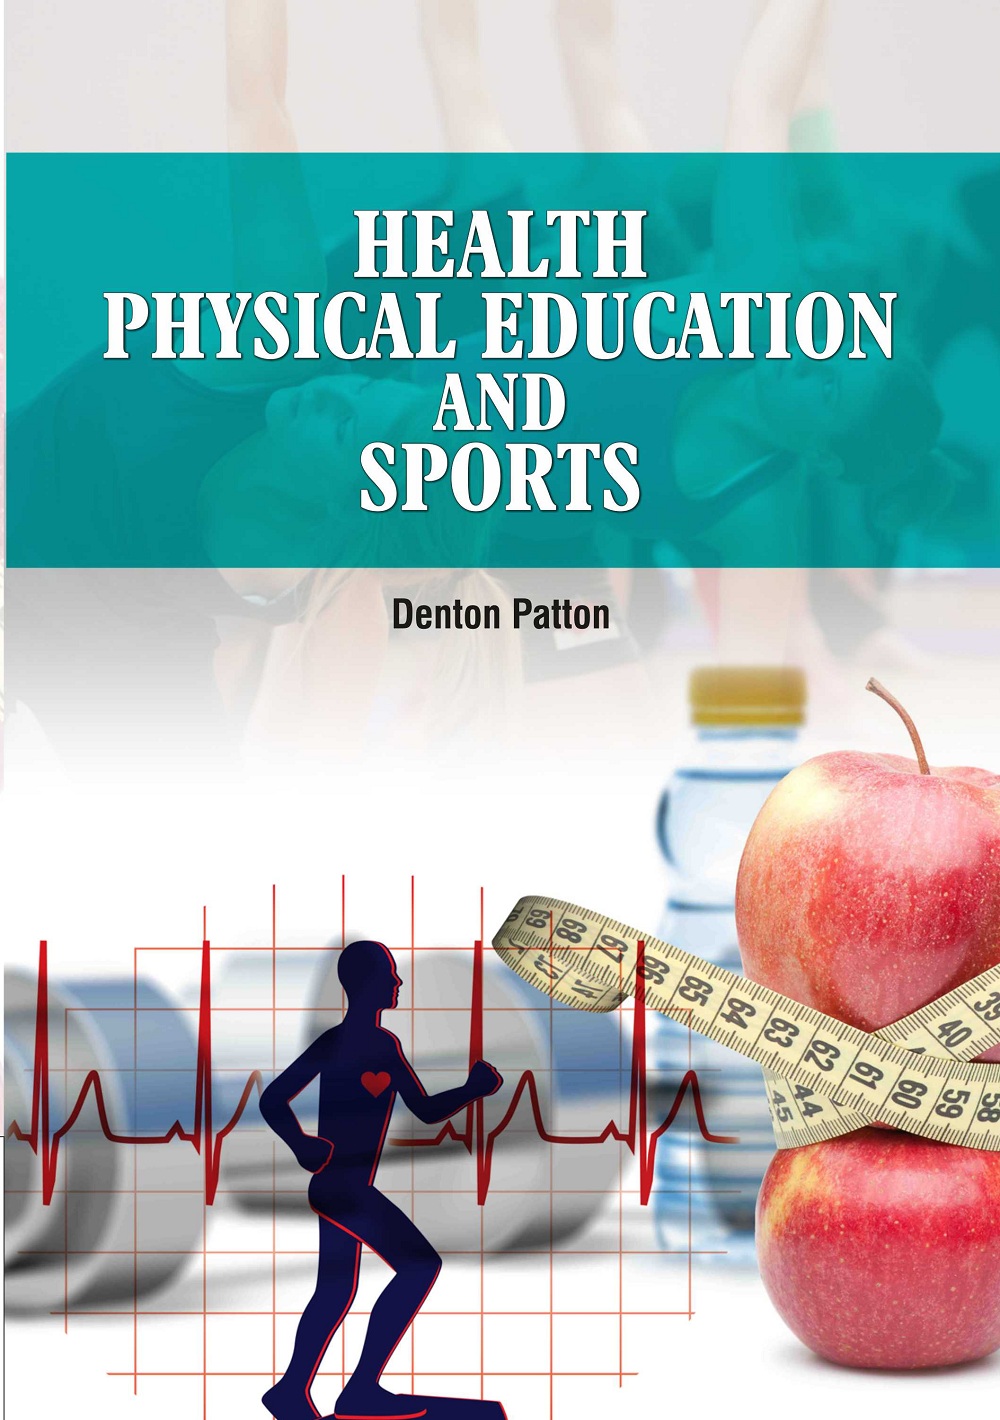 Health, Physical Education And Sports